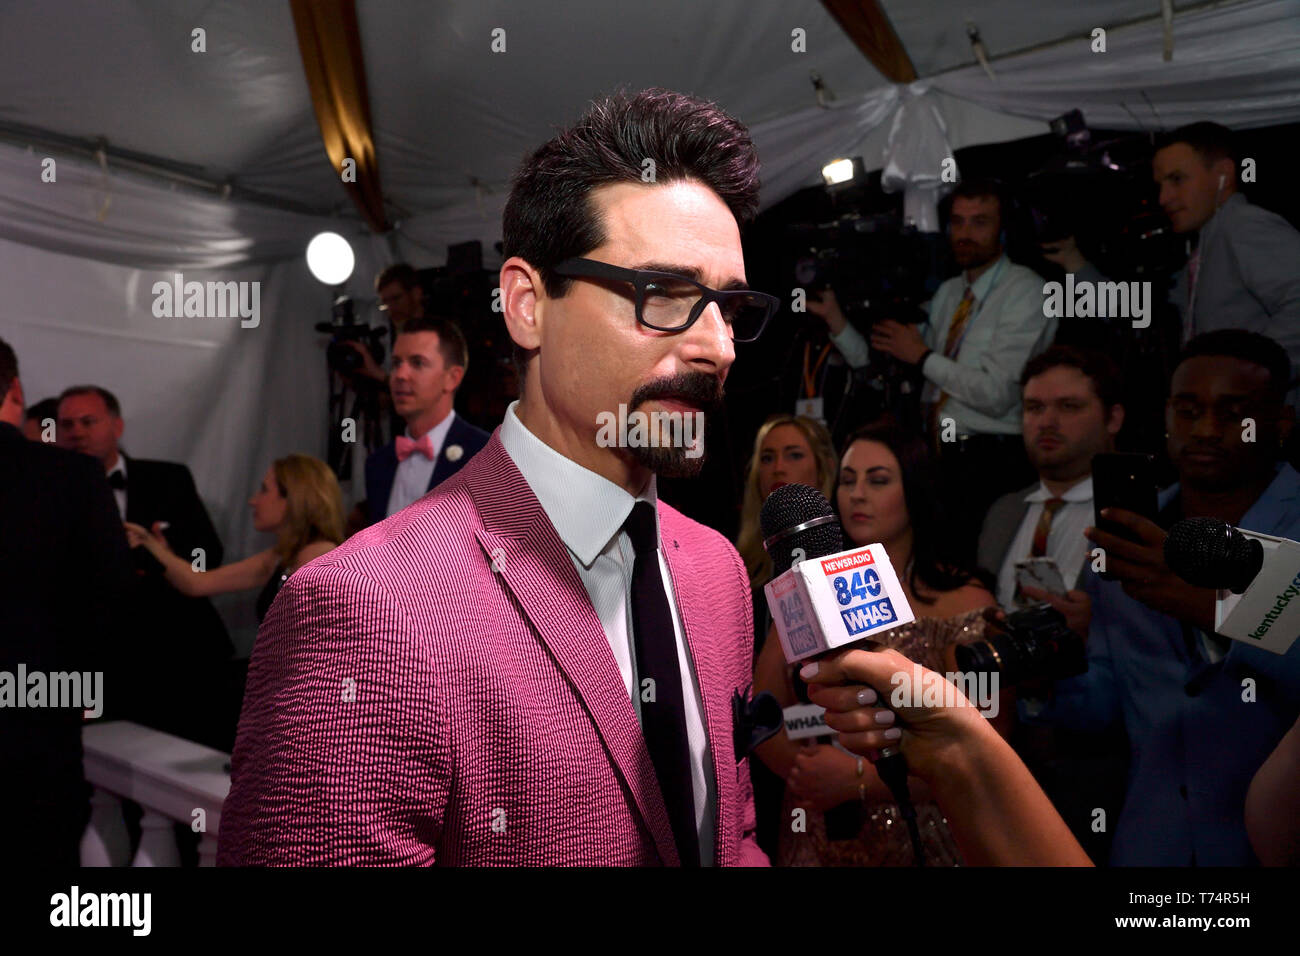 Louisville, Kentucky, USA. 03rd May, 2019. Backstreet Boys attends the 2019 Barnstable Brown Kentucky Derby Eve Gala on May 3, 2019 in Louisville, Kentucky. Photo: C Michael Stewart/imageSPACE/MediaPunch Credit: MediaPunch Inc/Alamy Live News Stock Photo